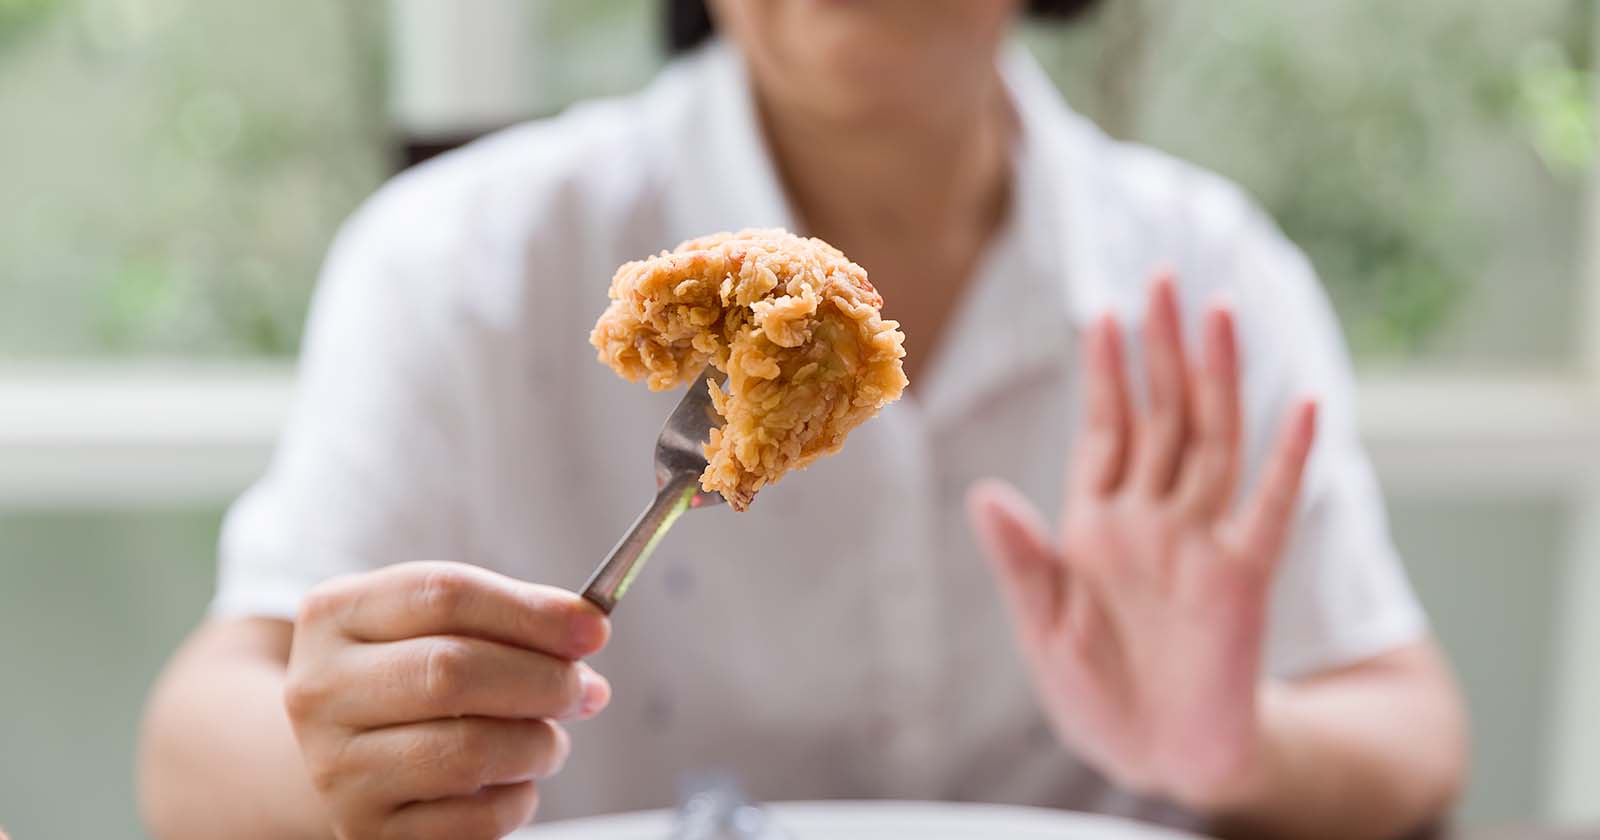 woman in white shirt holding up a piece of fried batter